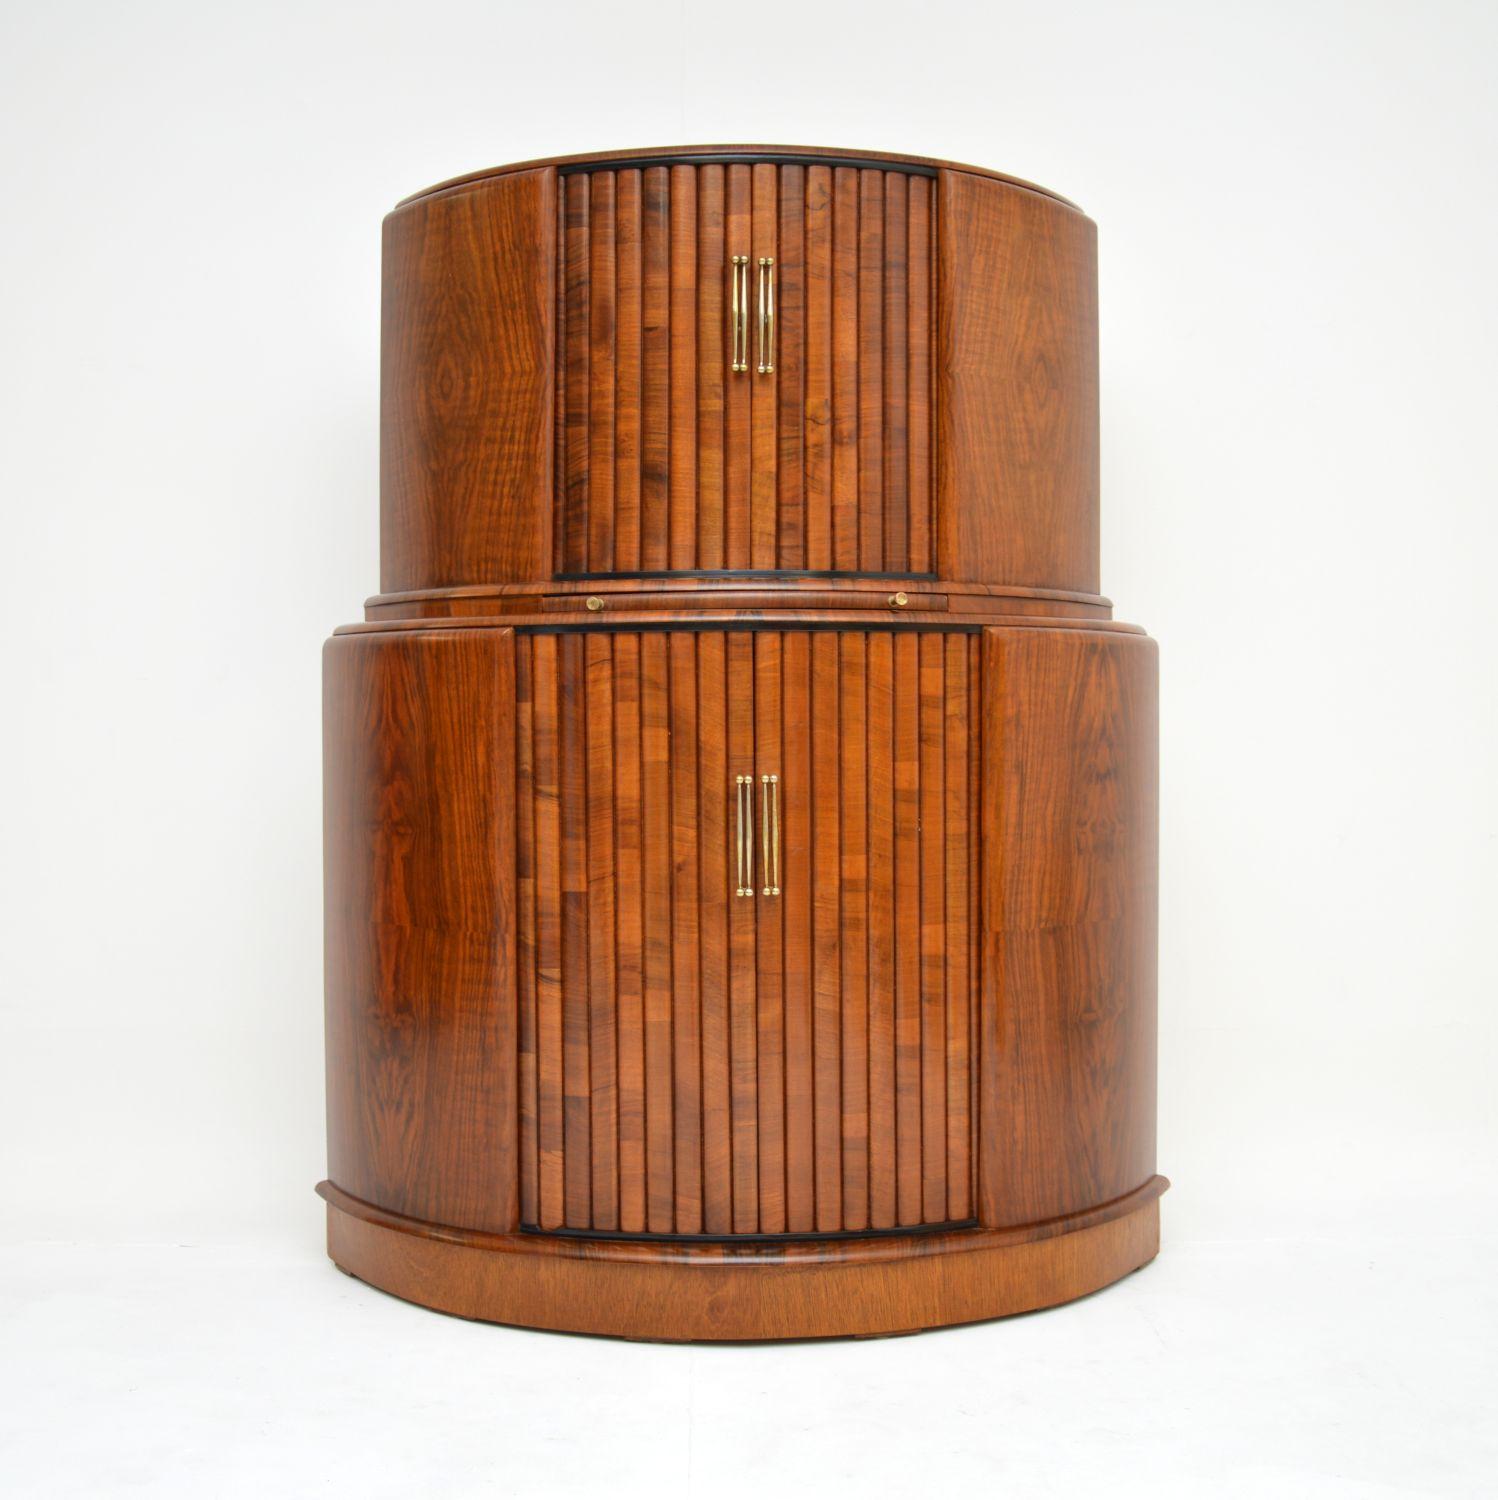 A stylish and very well made Art Deco cocktail drinks cabinet in Walnut. This was made in England, it dates from around the 1930-50’s.

The quality is excellent, this has clever tambour rolling doors at the top and bottom section. The top section